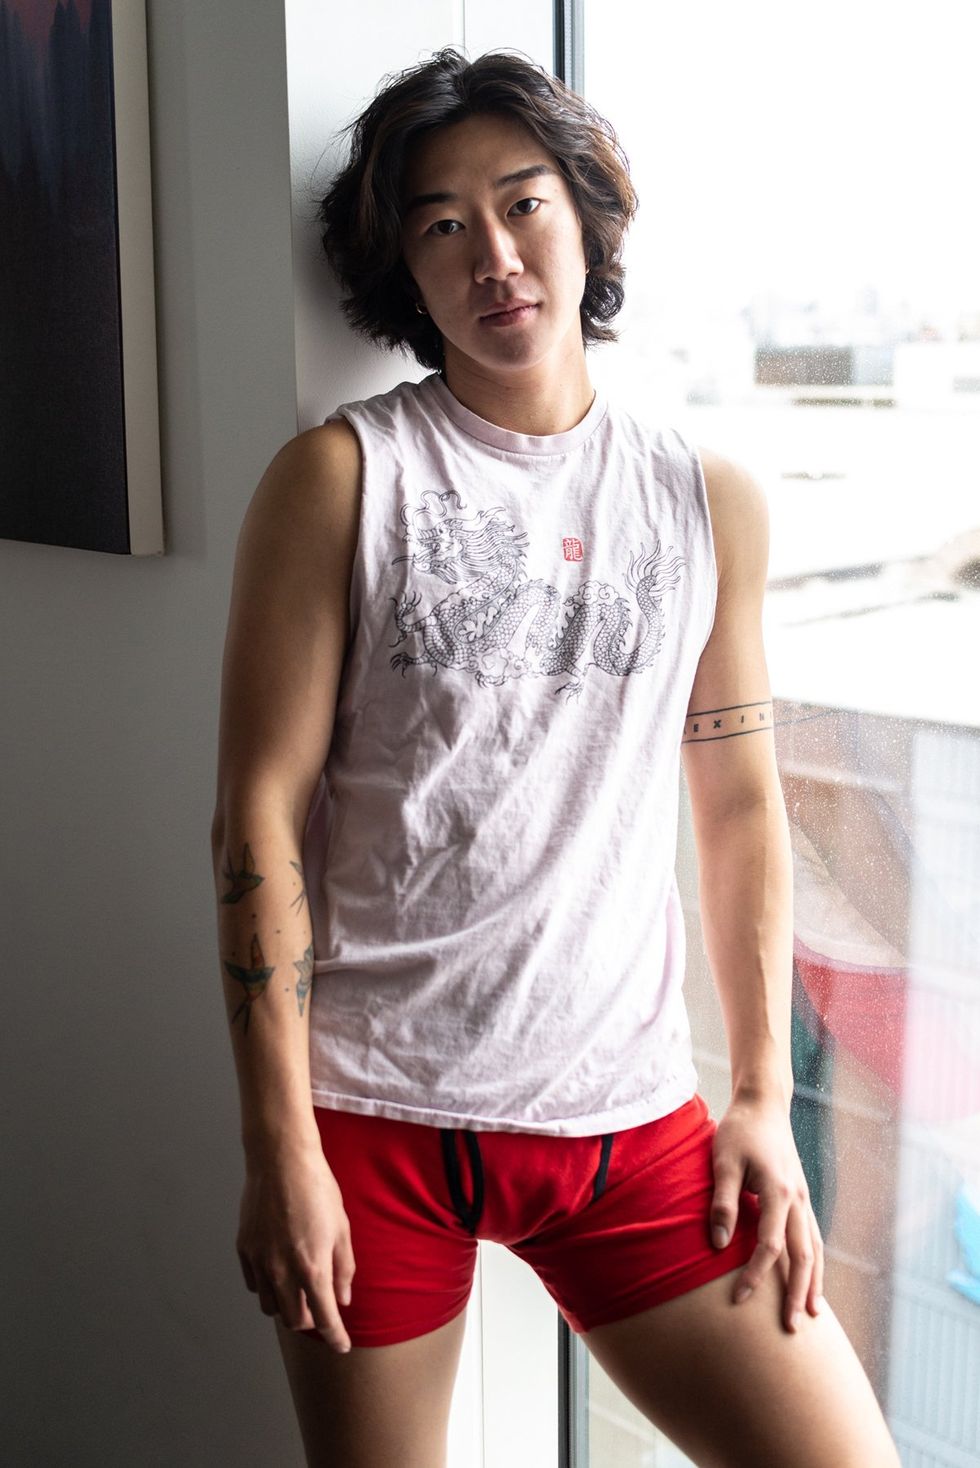 Asian American in sleeveless shirt and red boxer briefs